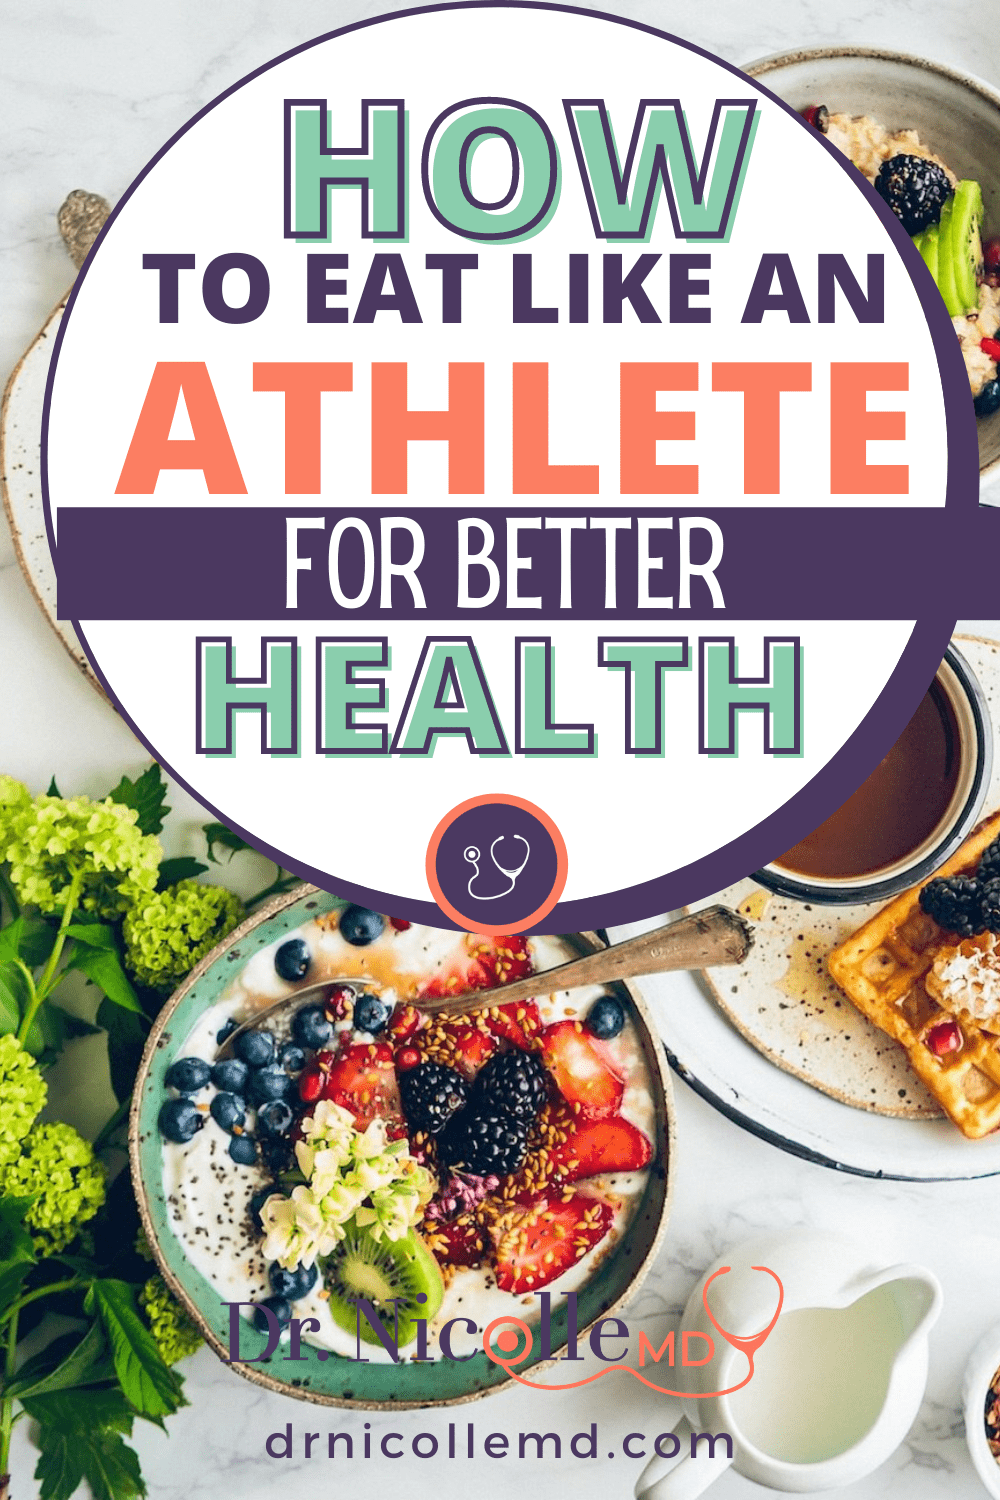 How to Eat Like an Athlete for Better Health